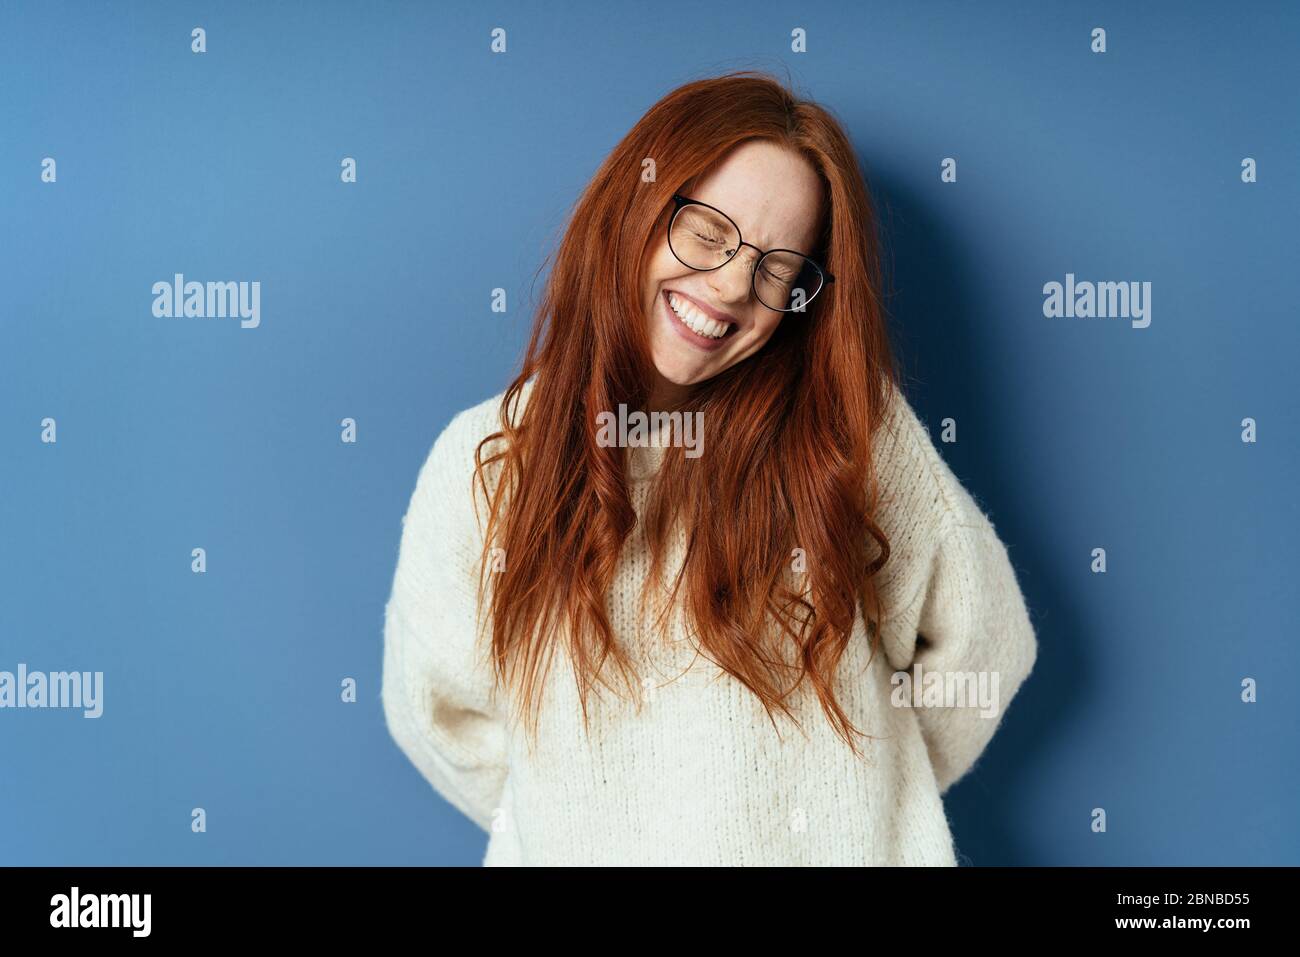 Cute young redhead woman with a lovely smile screwing up her eyes as she  grins happily at the camera on a blue studio background with copy space  Stock Photo - Alamy